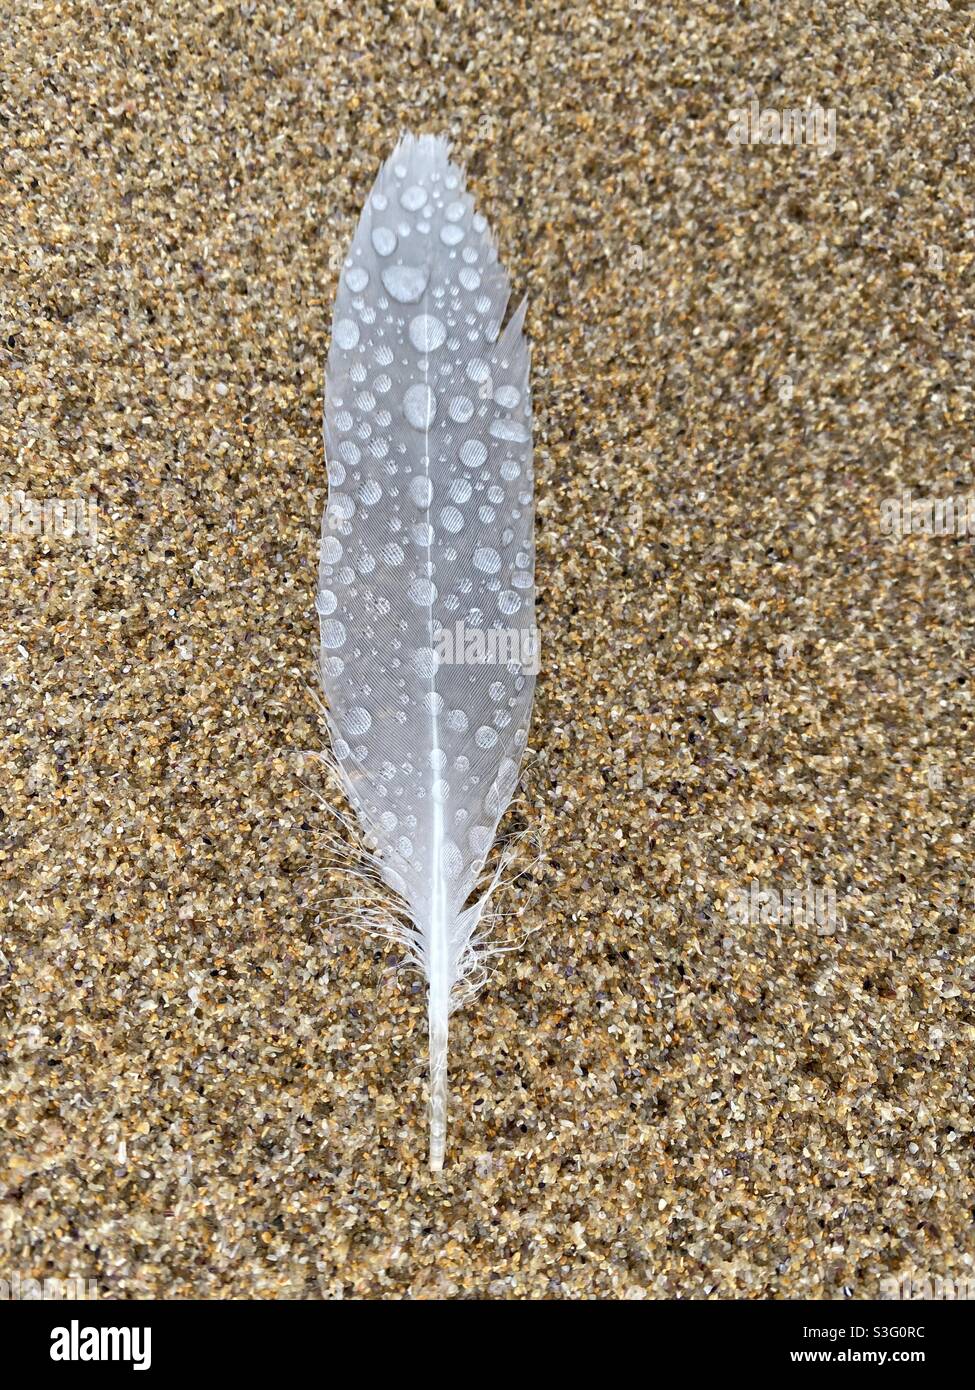 White feather on sand with water drops. Vertical nature background birds feather. Coastal theme of bird life, closeup detail on sand, white feather and rain drops. Stock Photo